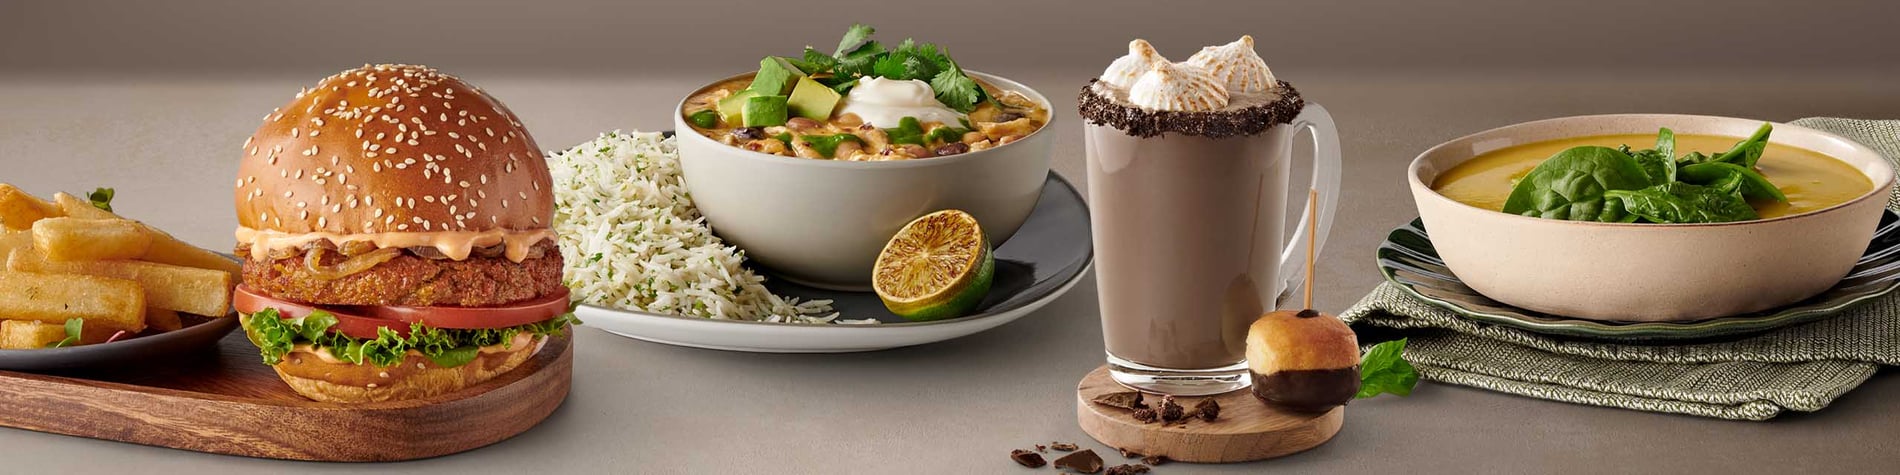 New meals from Mugg & Bean including a Marshmallow Cookies & Cream Hot Chocolate, a Creamy Chicken & Bean Chili Bowl, a Veggie Gourmet Burger, and a Red Lentil Coconut Soup.